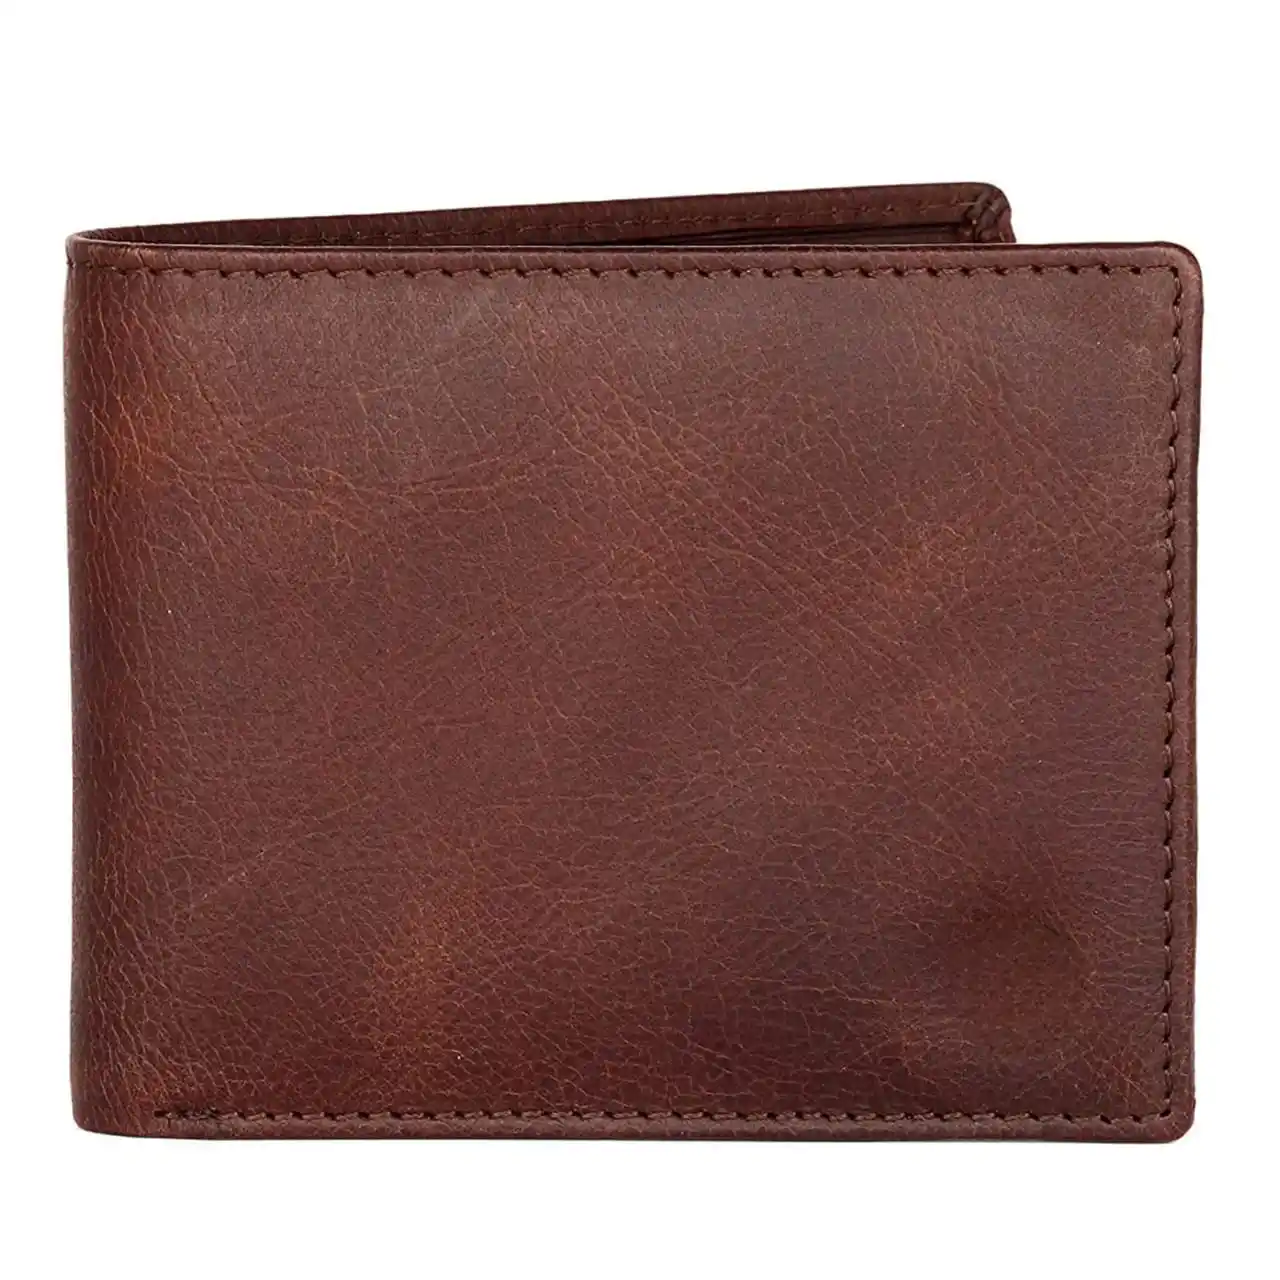 2023 Men's Fashion Multi-card Wallet with Coin Pocket Genuine Leather Smart Wallet for men